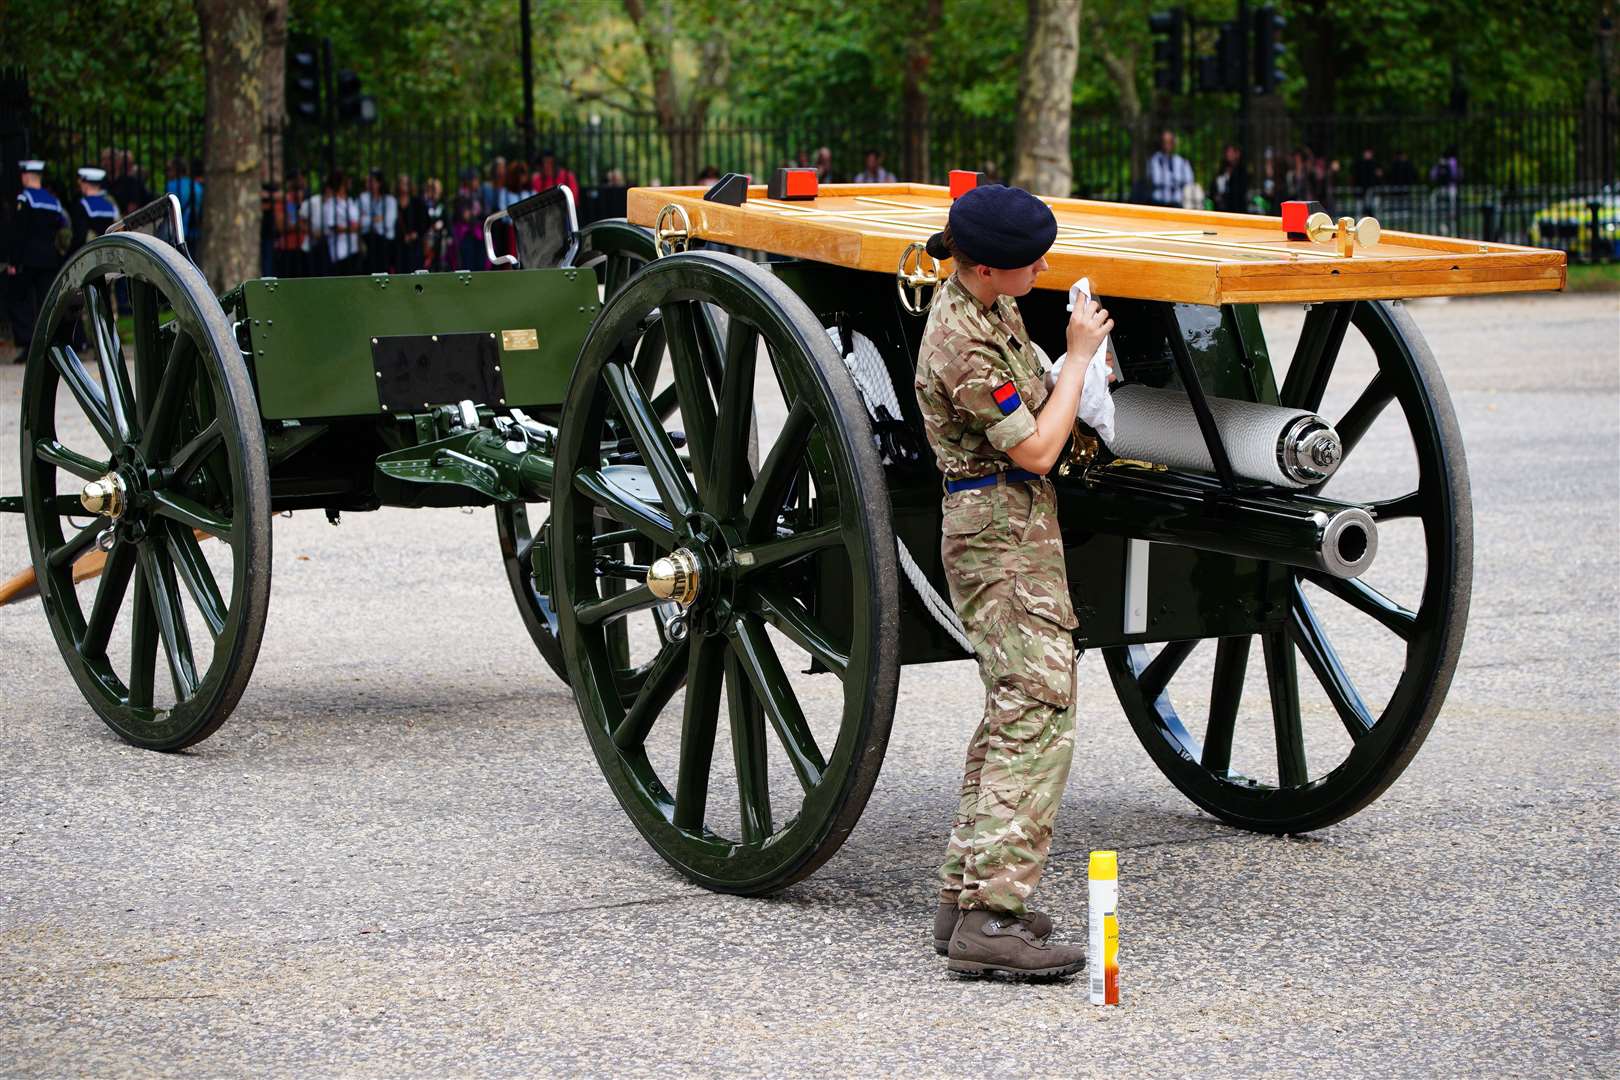 Military personnel cleaning a gun carriage as they made their final preparations at Wellington Barracks ahead of the ceremonial procession (Ben Birchall/PA)